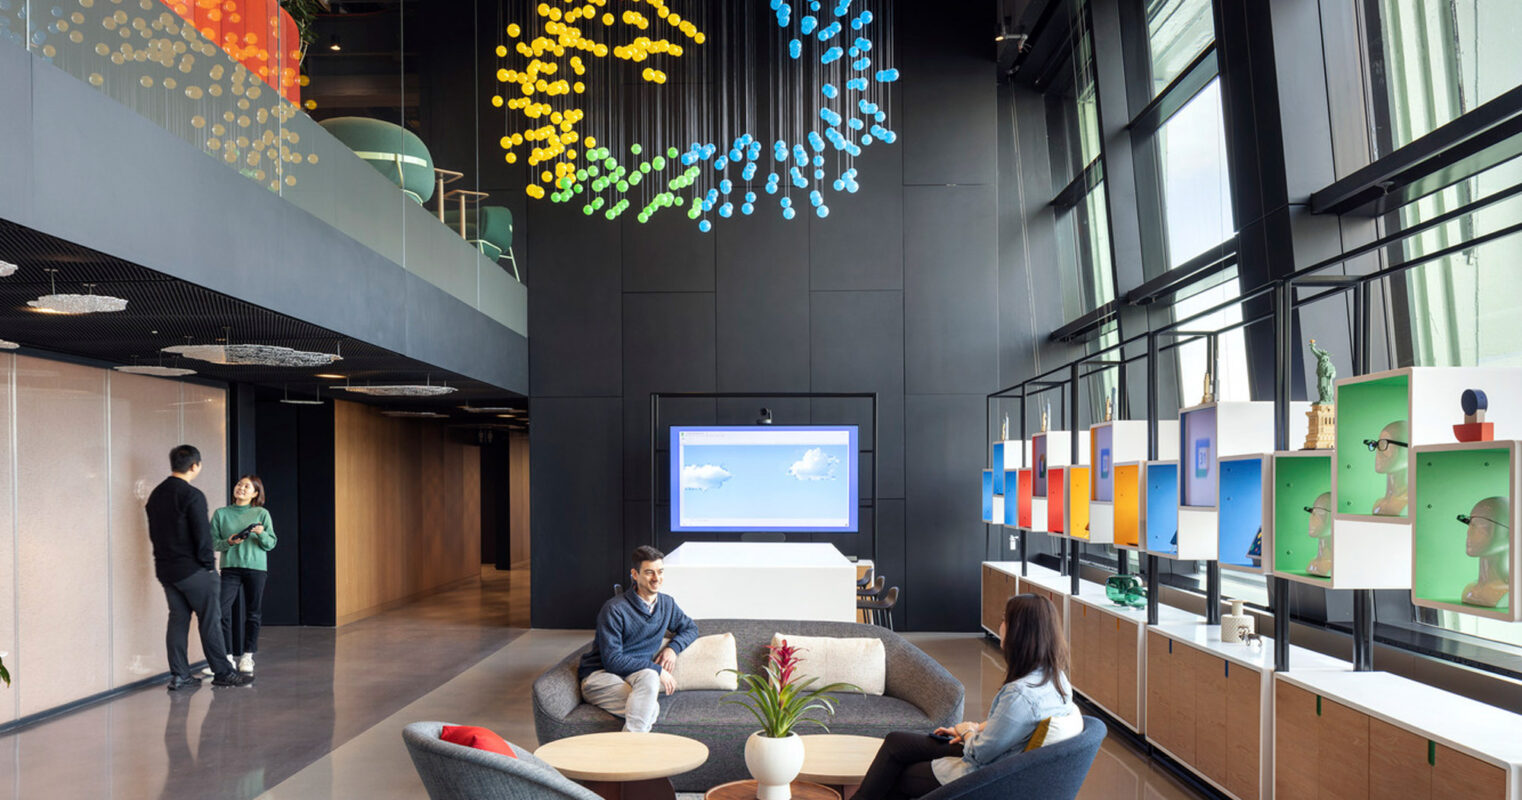 Modern office lobby with eclectic decor, featuring colorful ceiling art installation, mid-century inspired furniture, and glass partition showcasing mounted artwork. An open-concept space fostering collaboration, with individuals engaged in conversation.